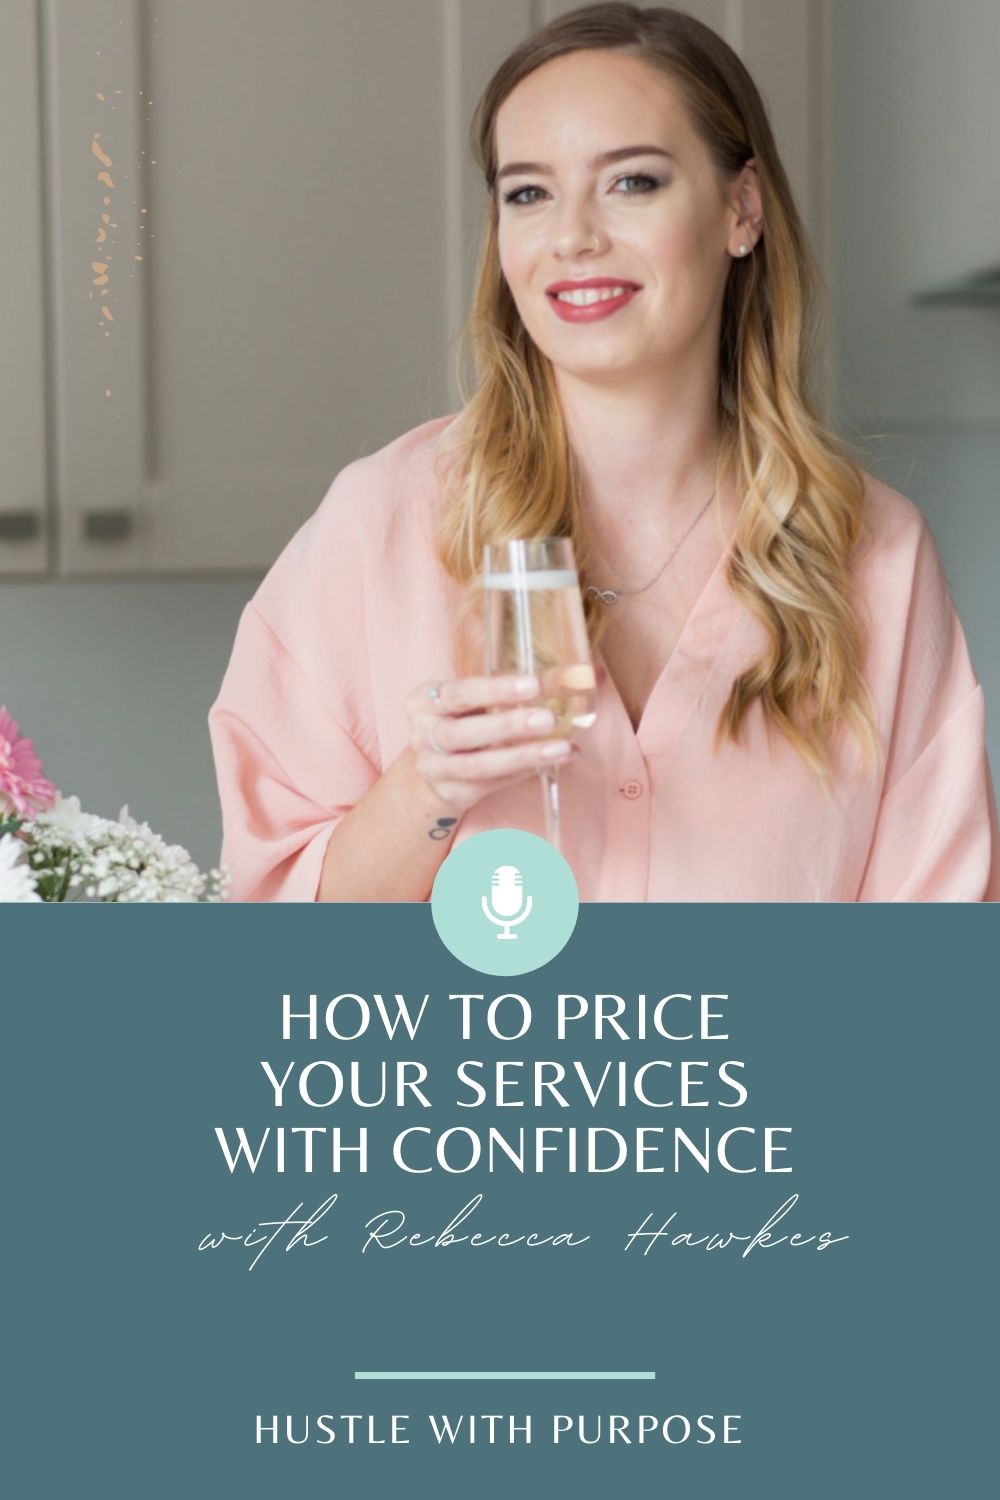 Price with Confidence